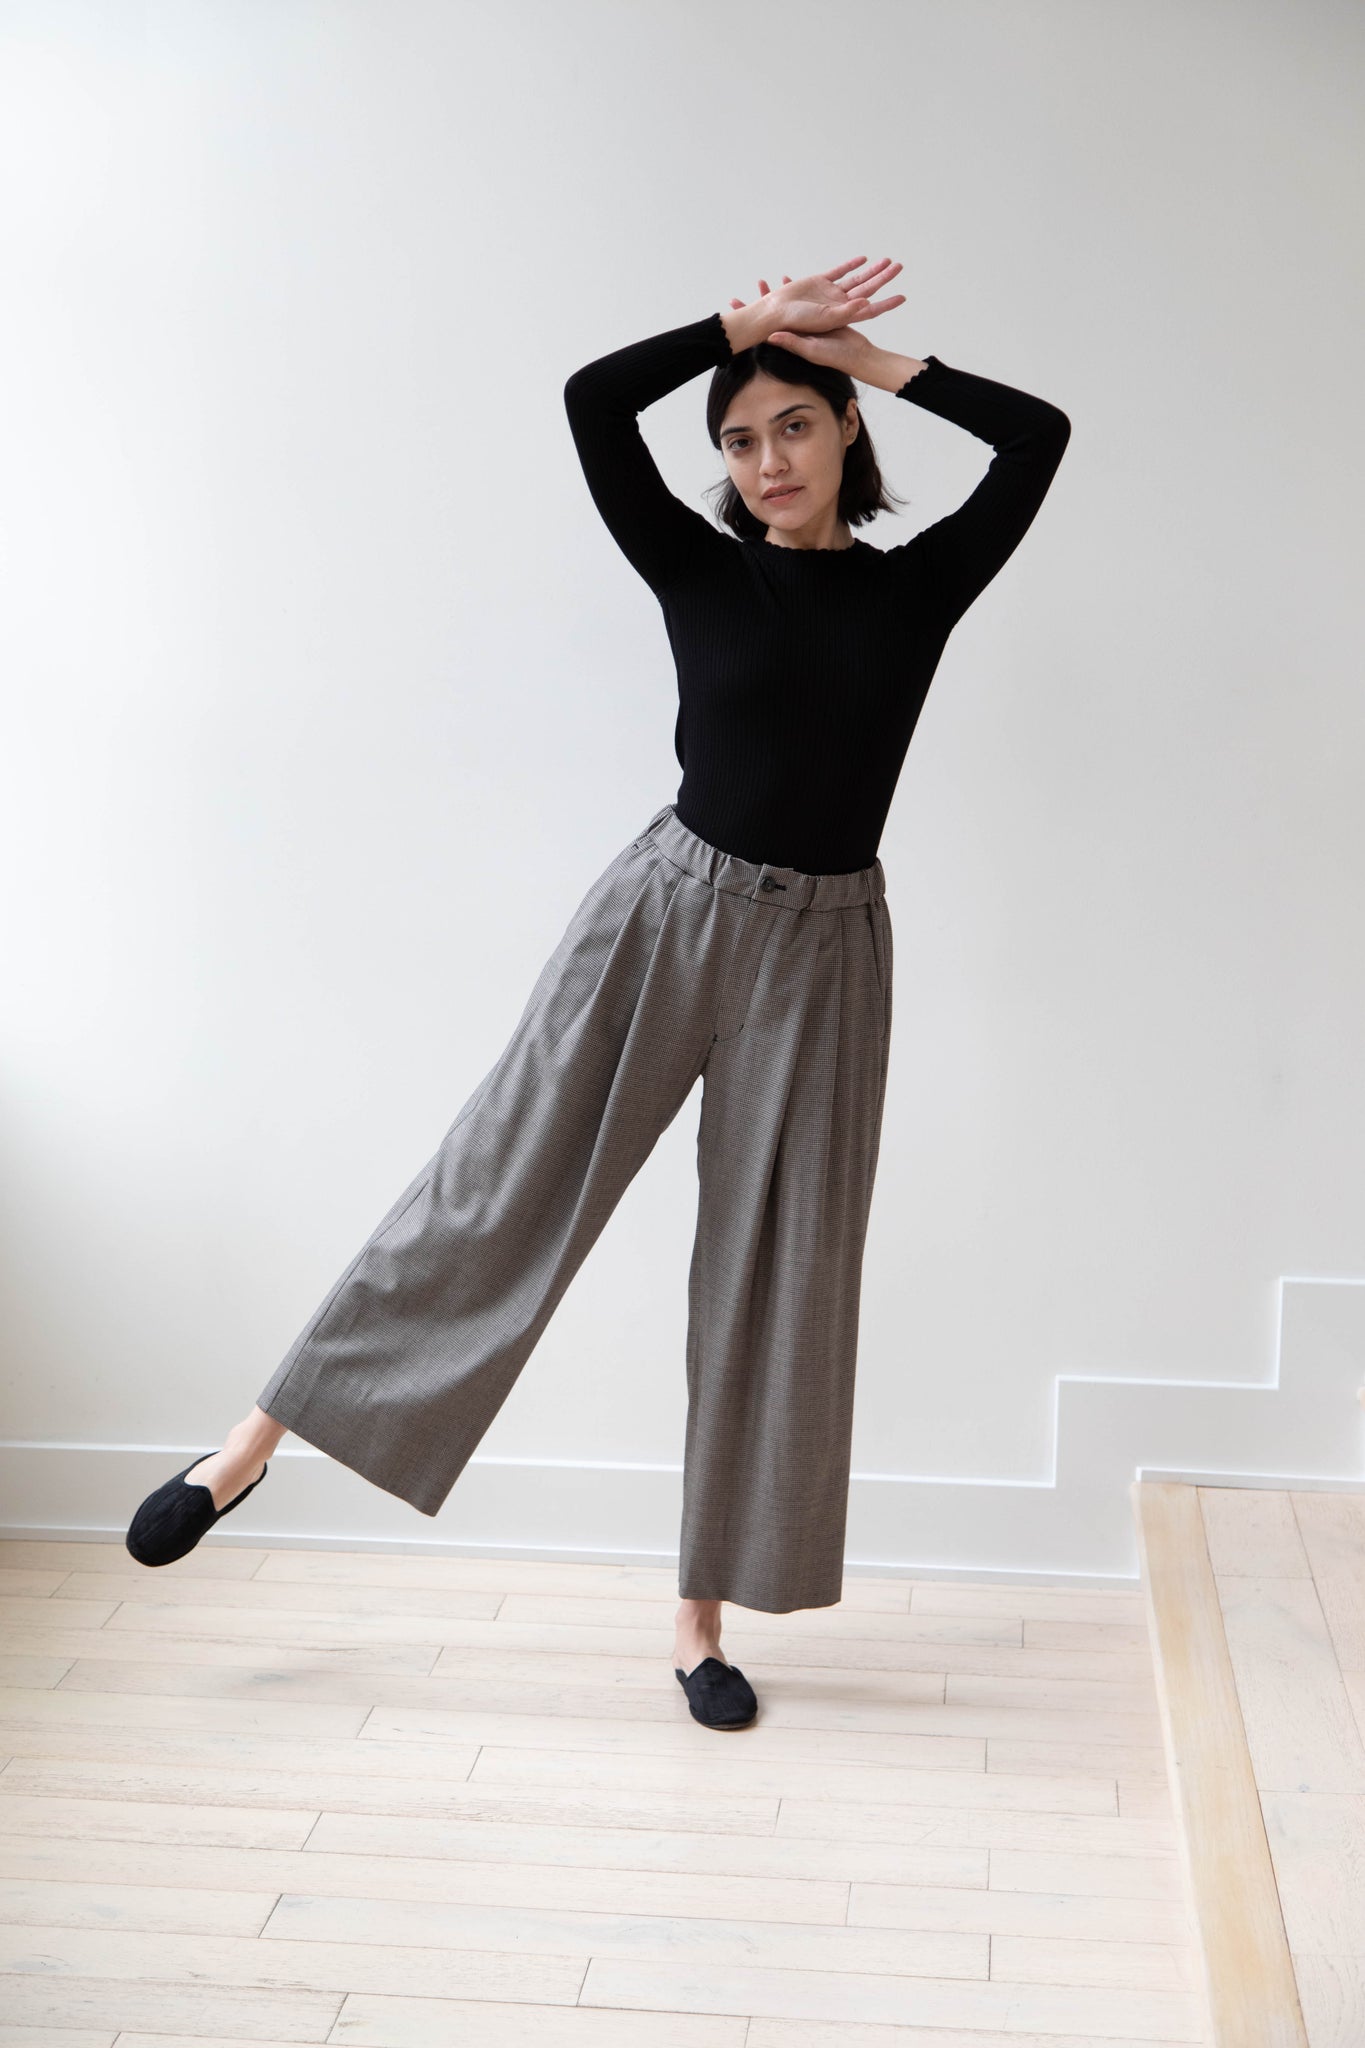 Arts & Science | Hakama Pants in Hounds Tooth